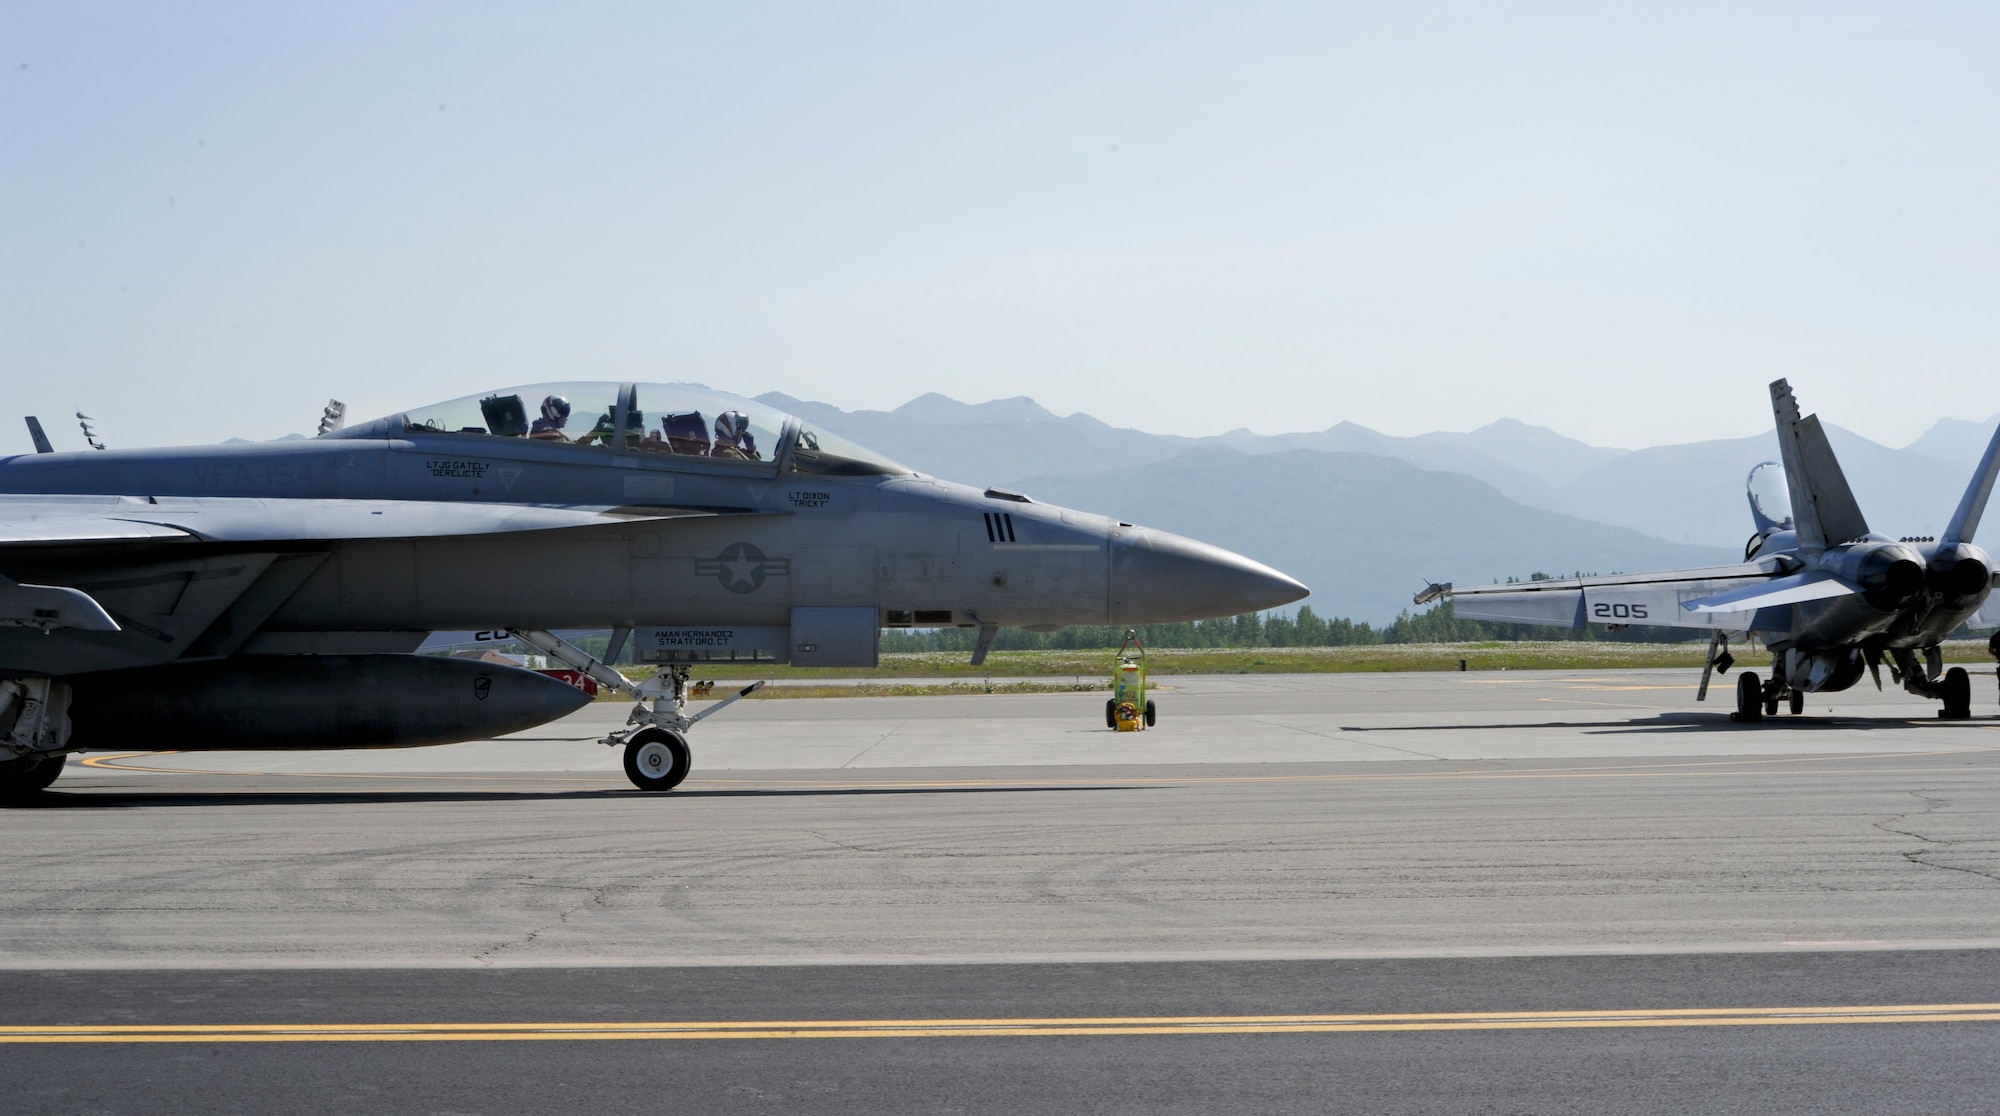 A U.S. Navy F/A-18F Super Hornet taxis after returning from a mission, during Exercise Northern Edge at Joint Base Elmendorf-Richardson, Alaska, June 18, 2015. Northern Edge 15 is Alaska’s premier joint training exercise designed to practice operations, techniques and procedures as well as enhance interoperability among the services. Thousands of participants from all services, from active duty, Reserve and National Guard units, are involved. (U.S. Air Force photo by Staff Sgt. William Banton/Released)‪